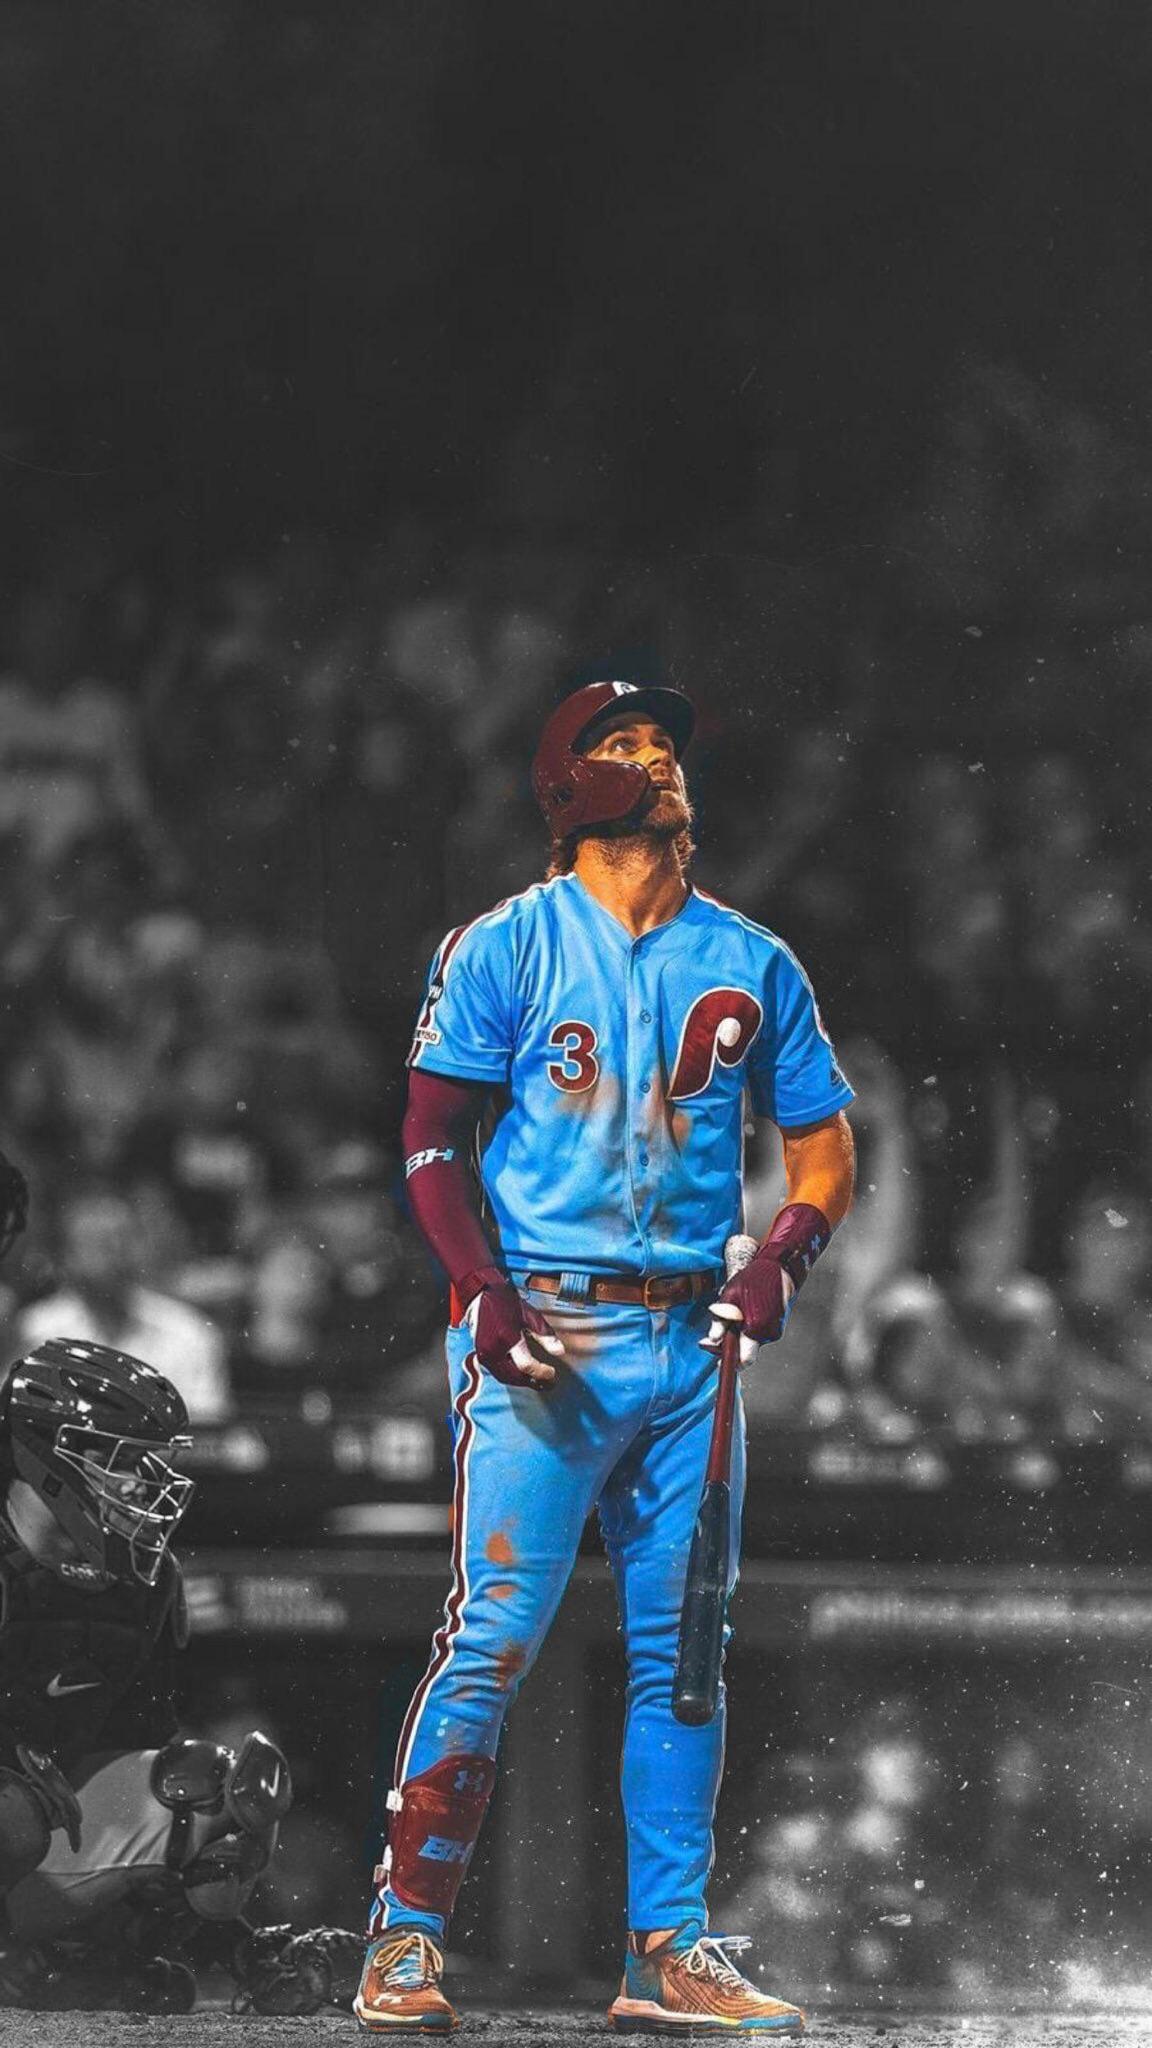 An Slight Edit To The Wallpaper Made Of Bryce Harper Hitting A